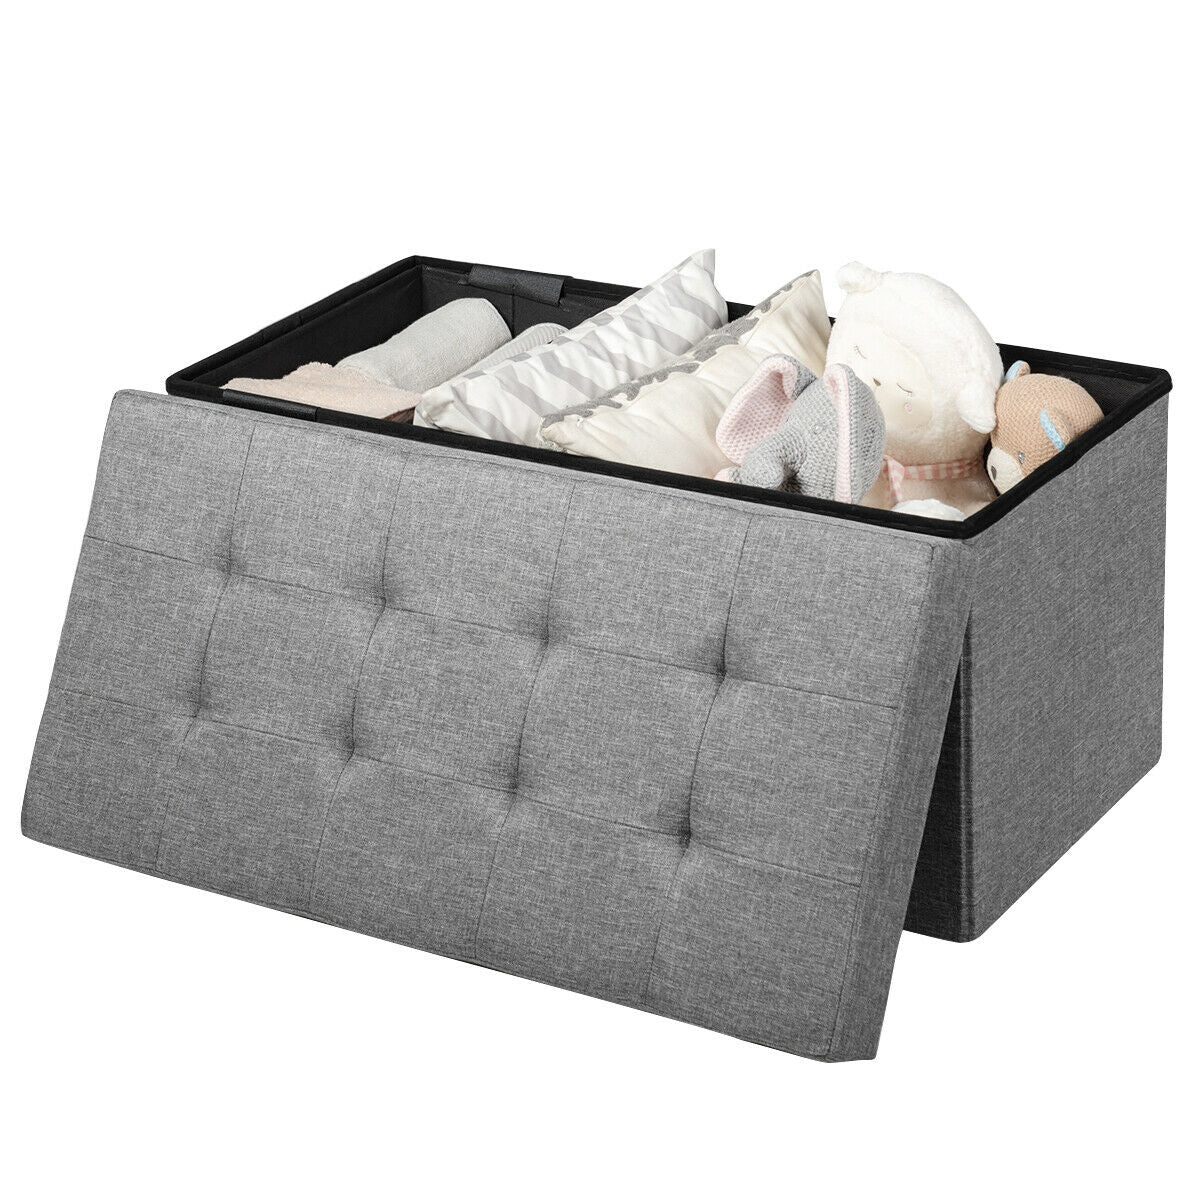 31.5 Inch Fabric Foldable Storage with Removable Storage Bin-Light Gray